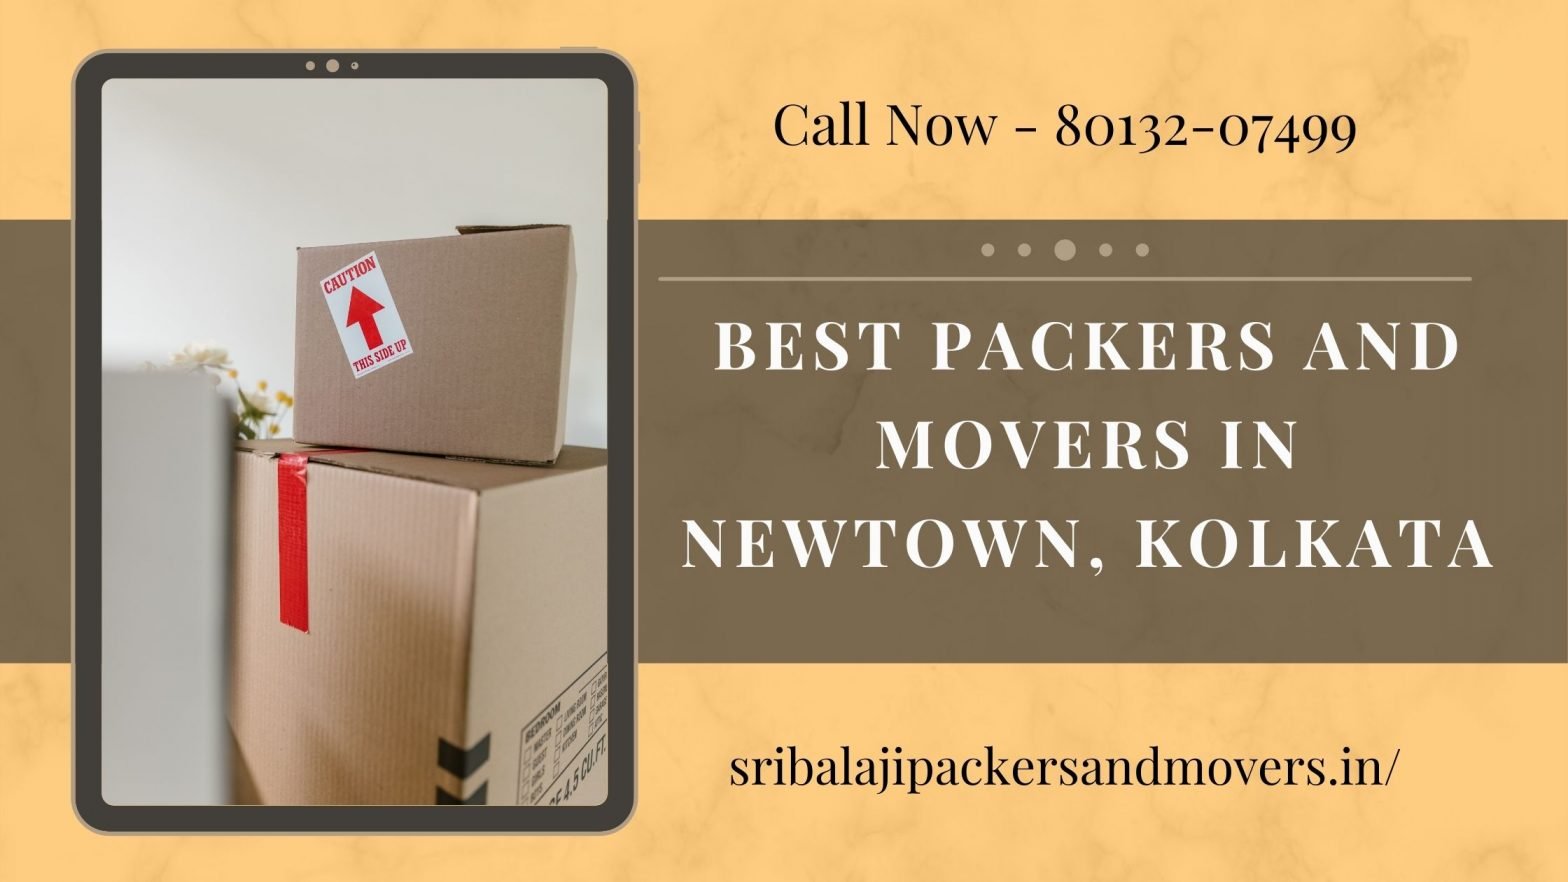 Best Packers and Movers in Newtown, Kolkata